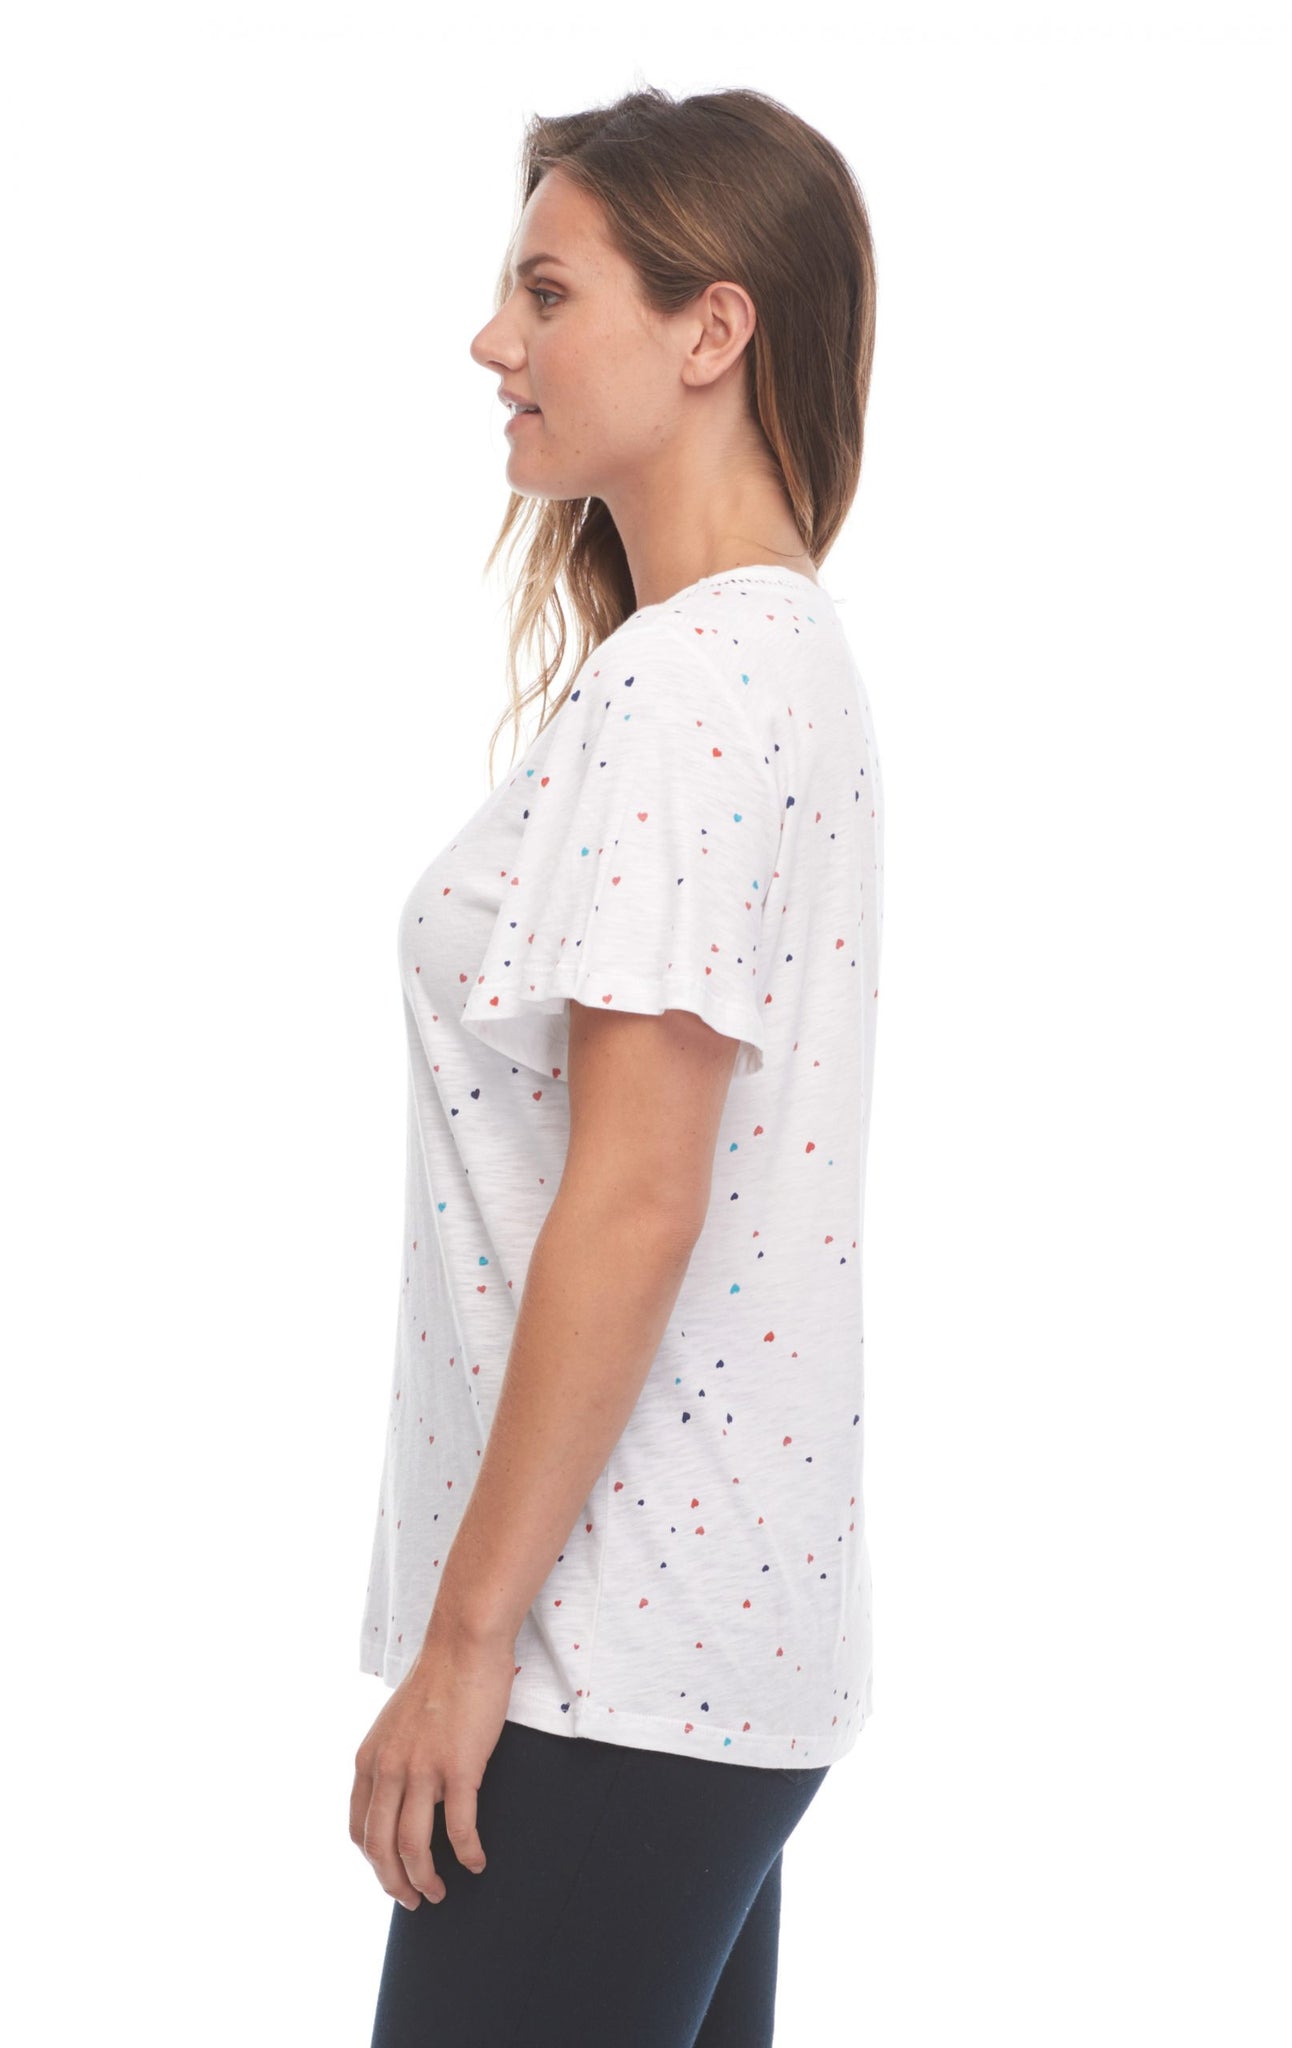 CONFETTI HEARTS PRINTED TOP WITH TRIM DETAIL - French Dressing